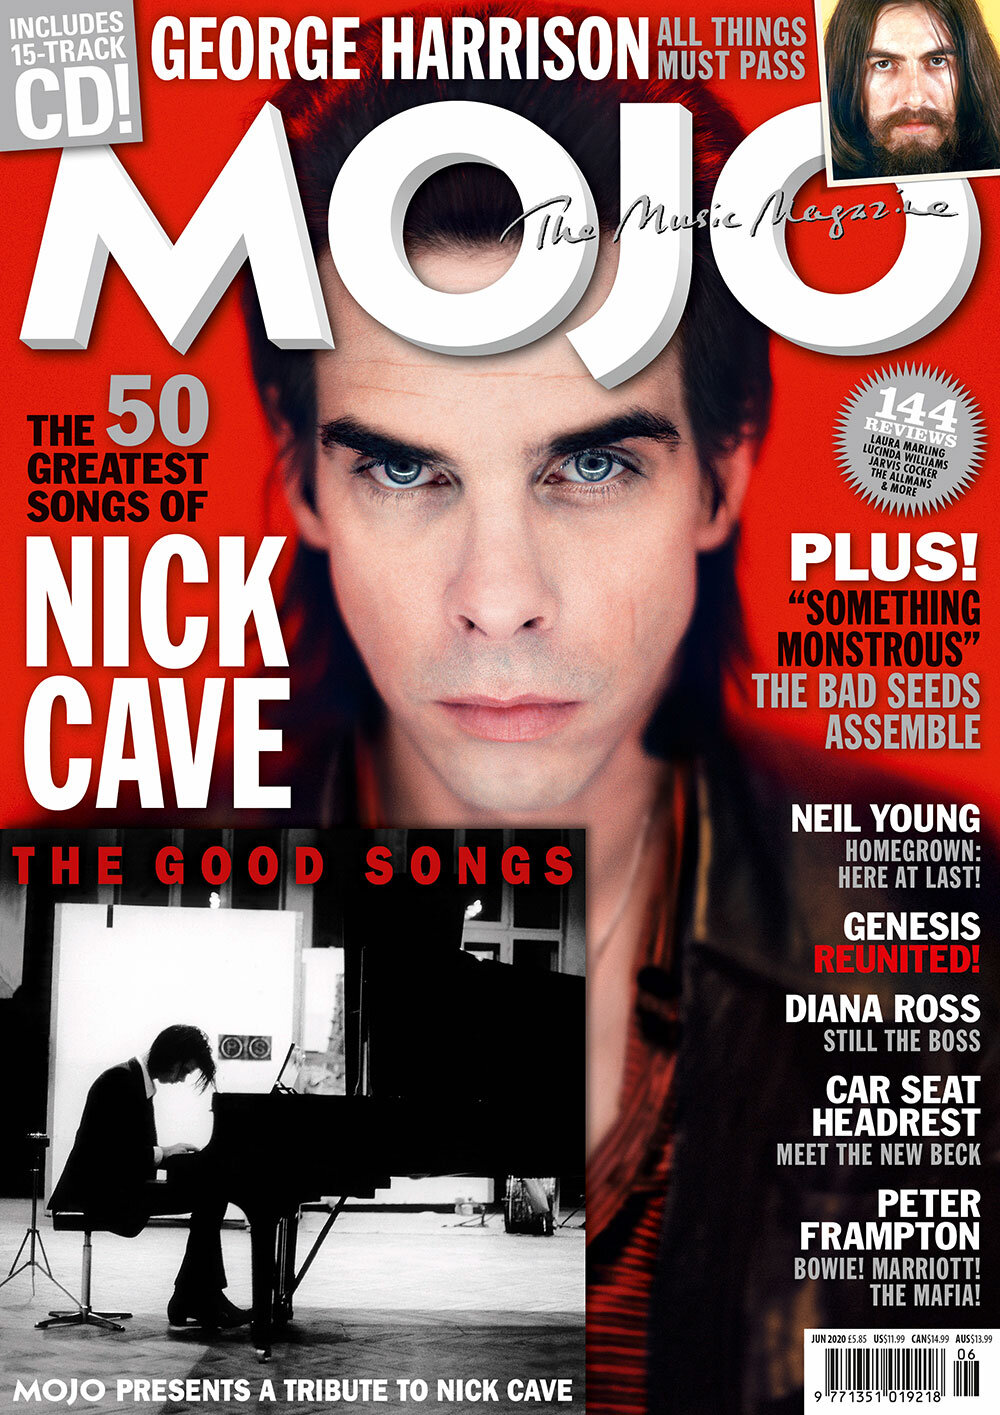 Mojo Magazine’s 50 Greatest Songs of Nick Cave